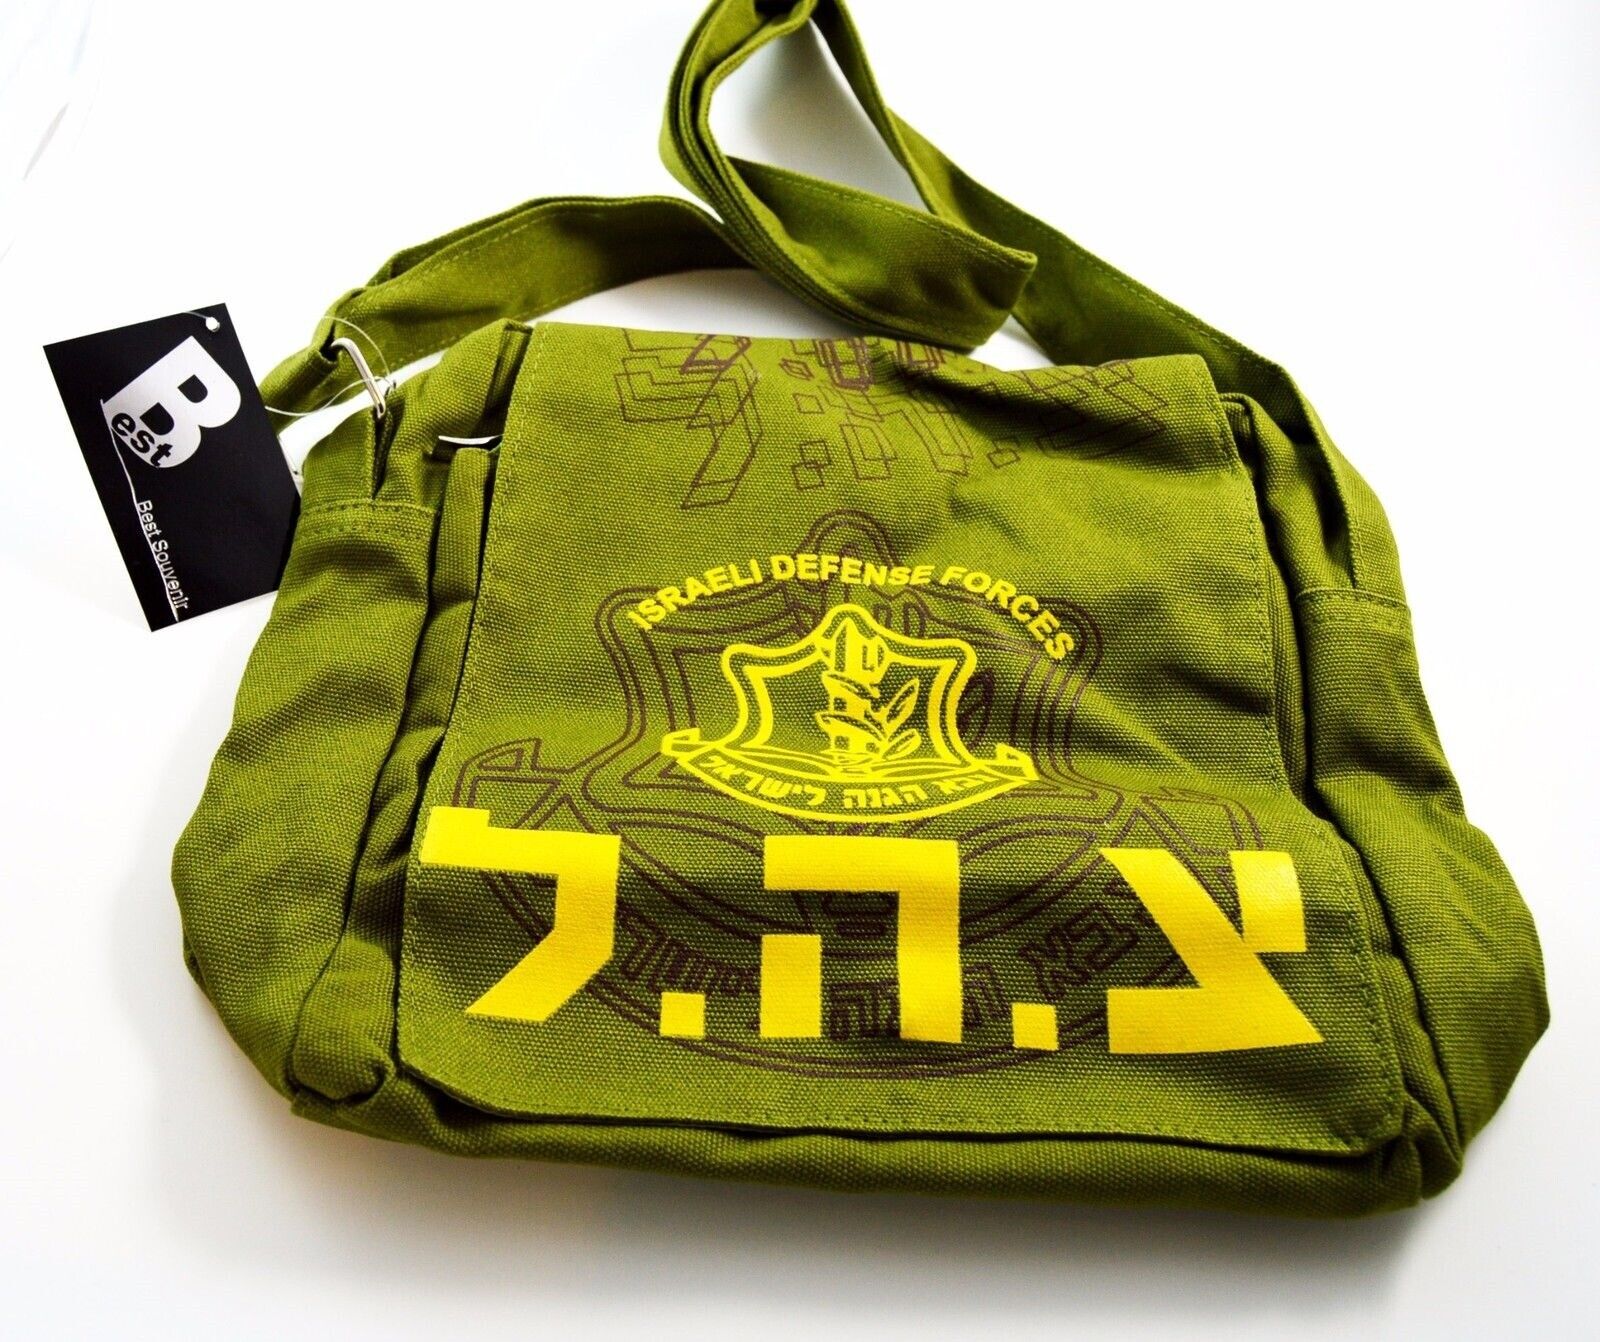 IDF Canvas Medic Bag. Replica of ones carried Israel Army Defense Forces ZAHAL